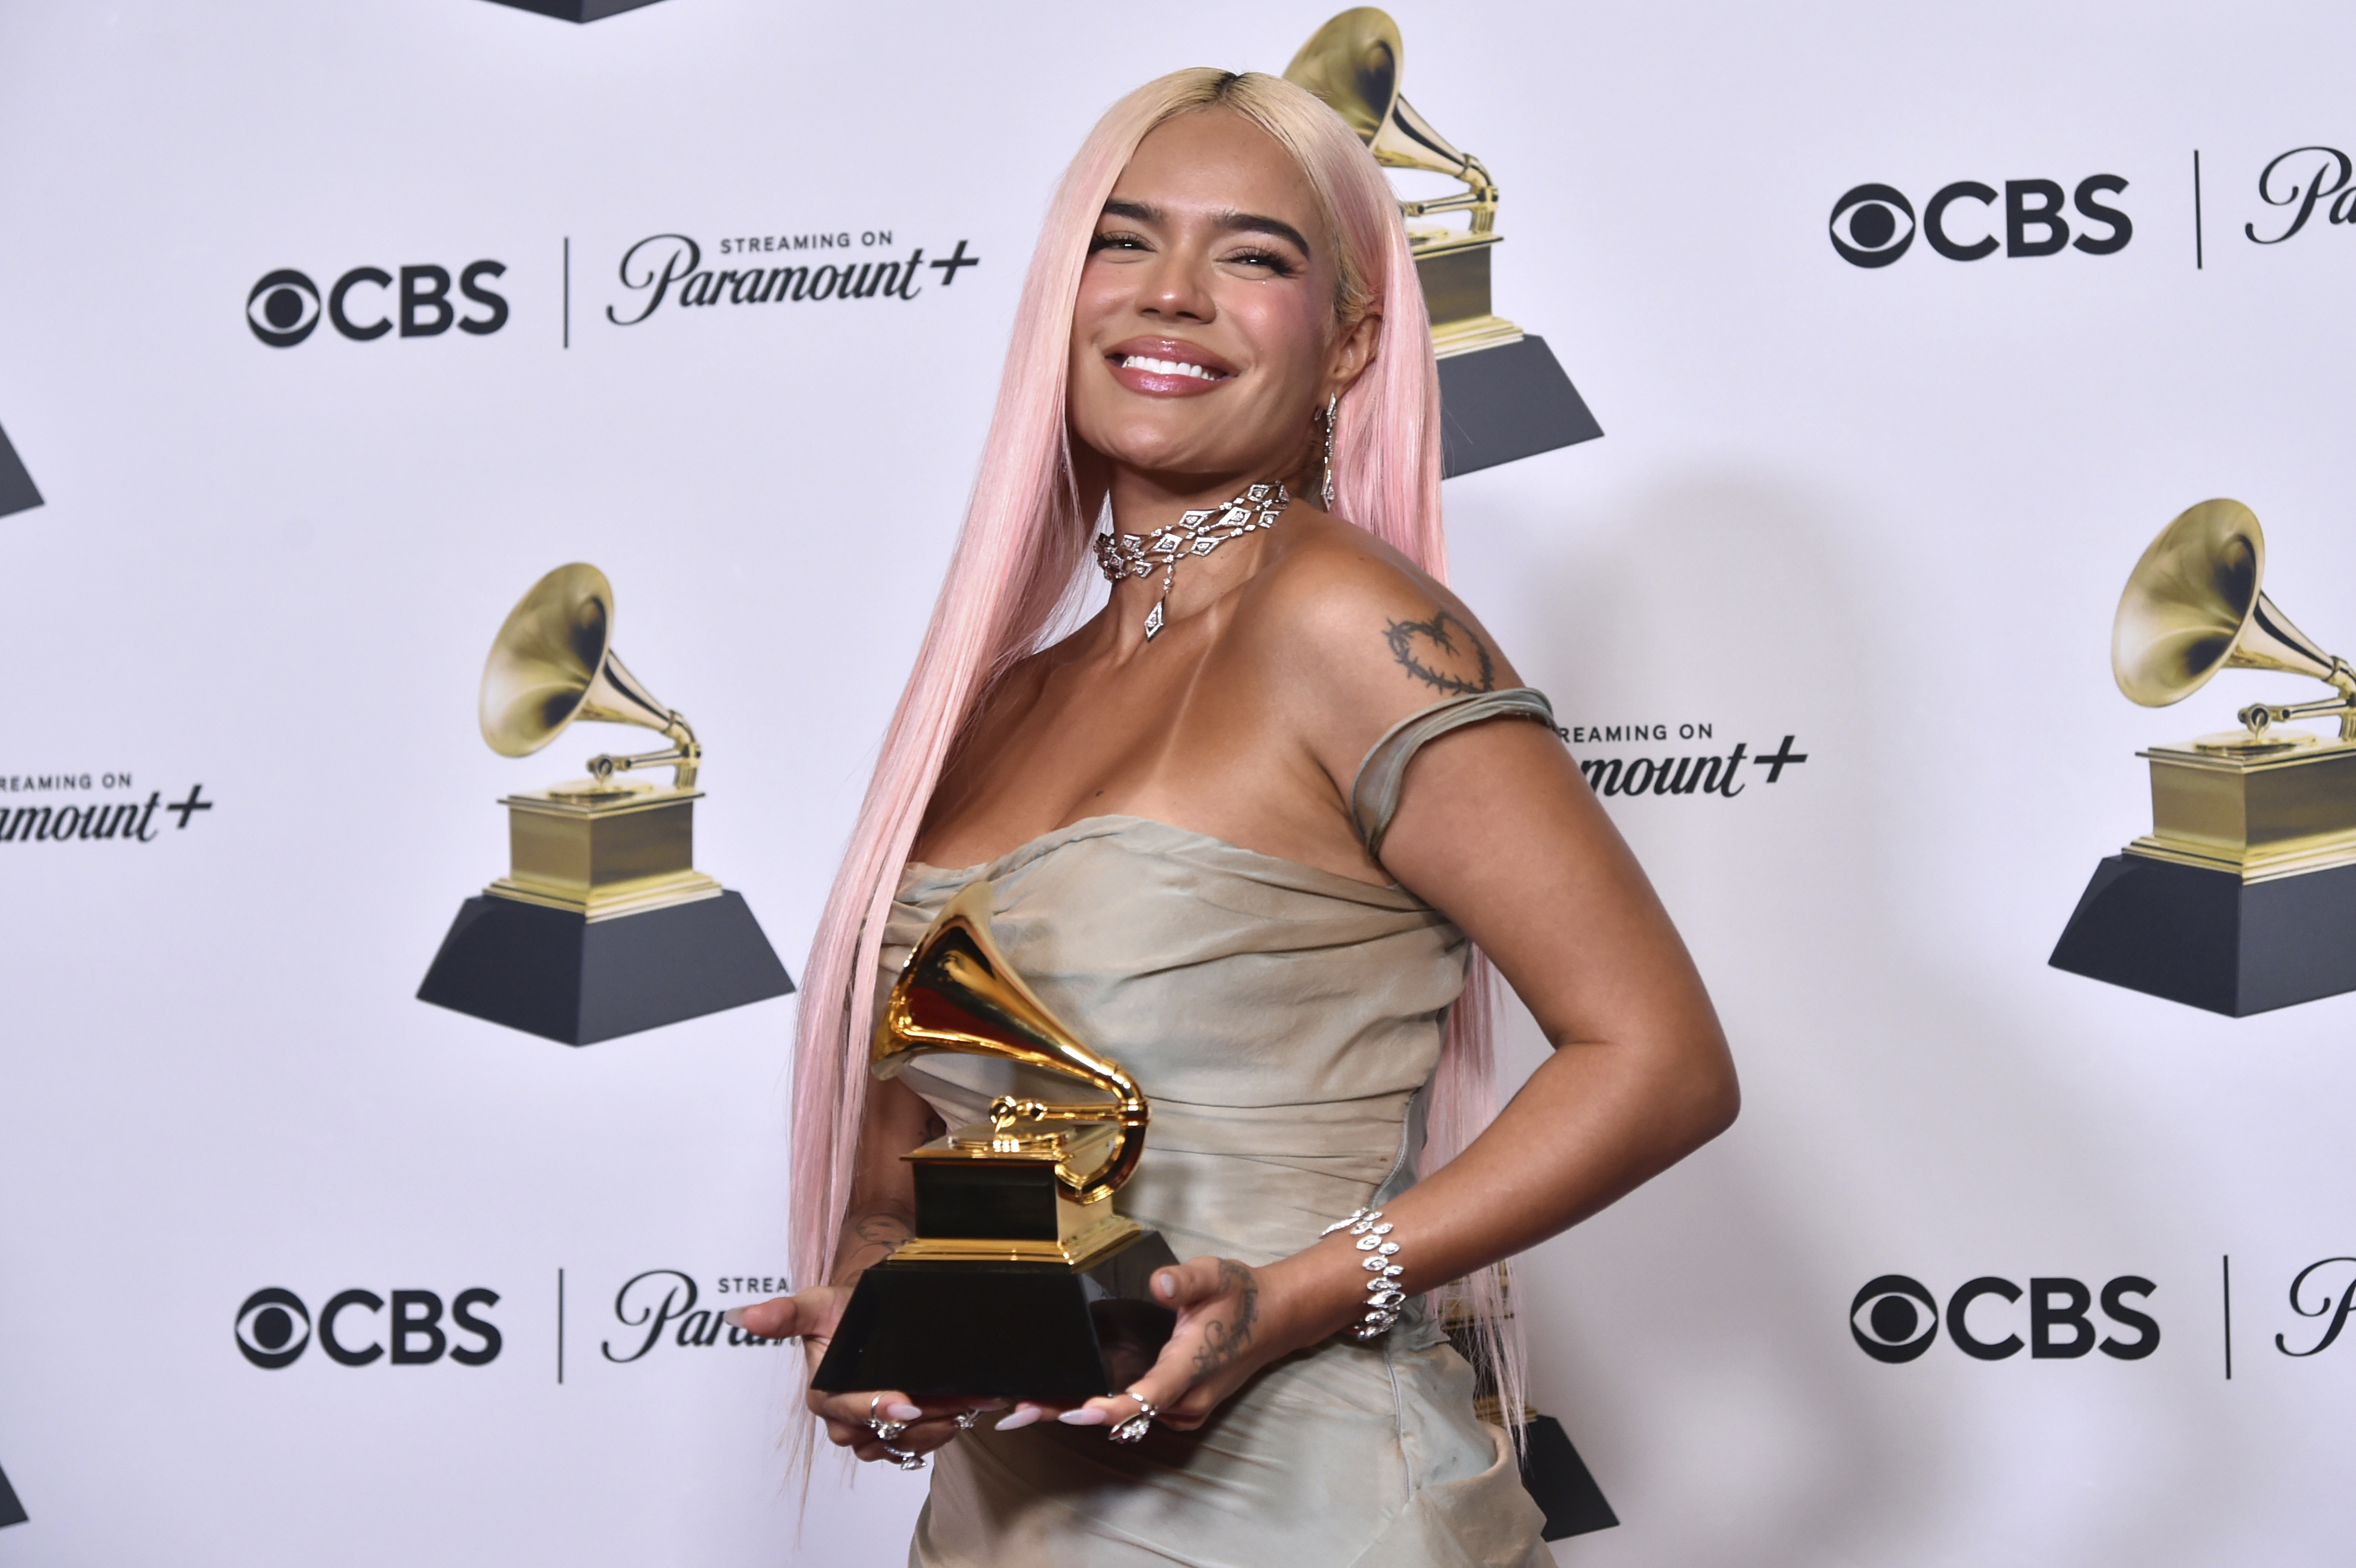 Who Is Karol G? The Colombian Singer and Songwriter and Her Best Known Songs